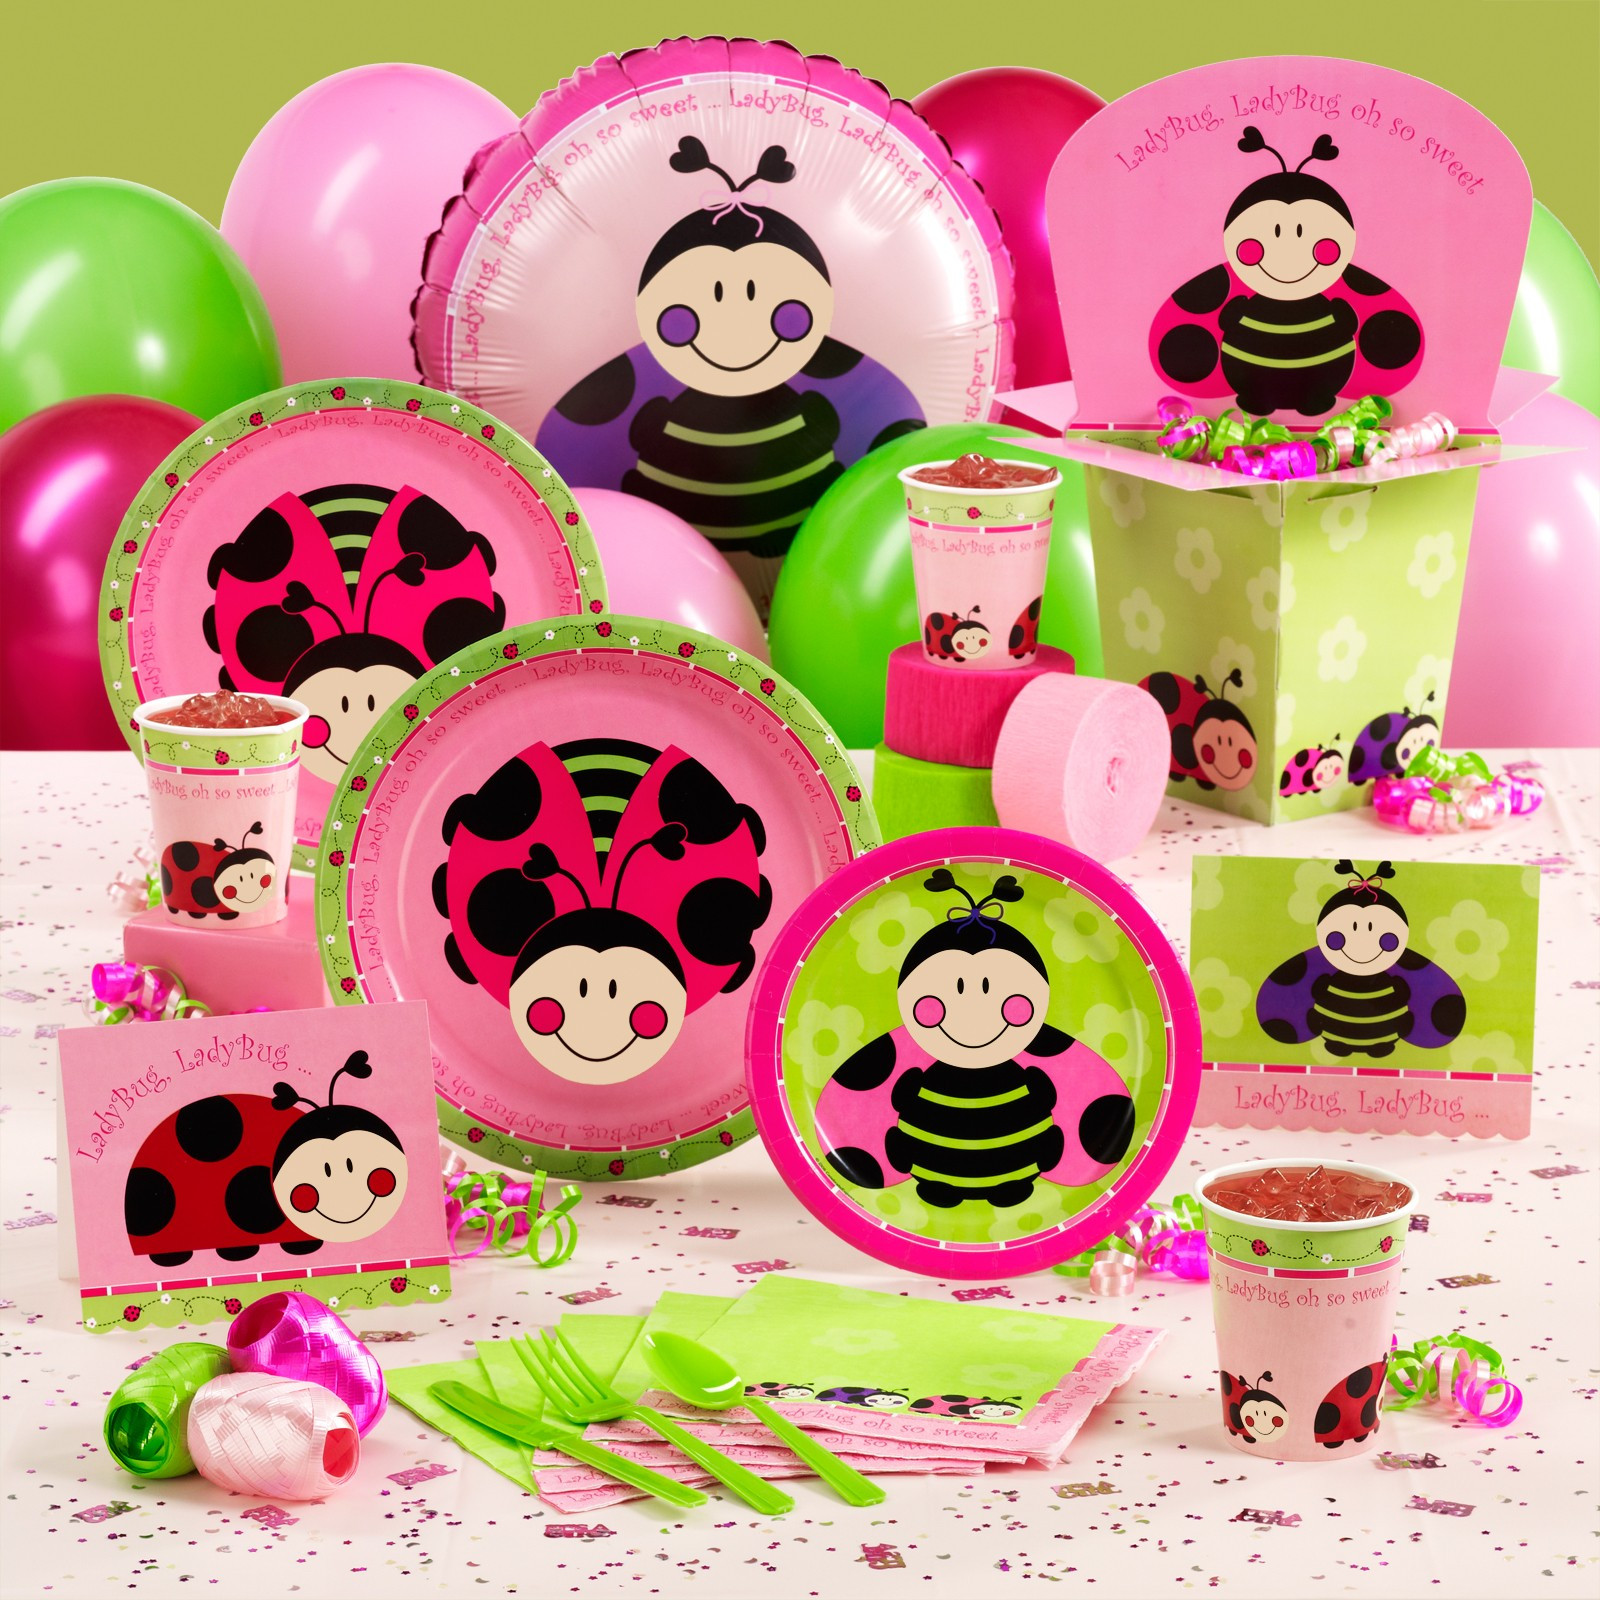 Party City Baby Shower Girl
 Sandy Party Decorations